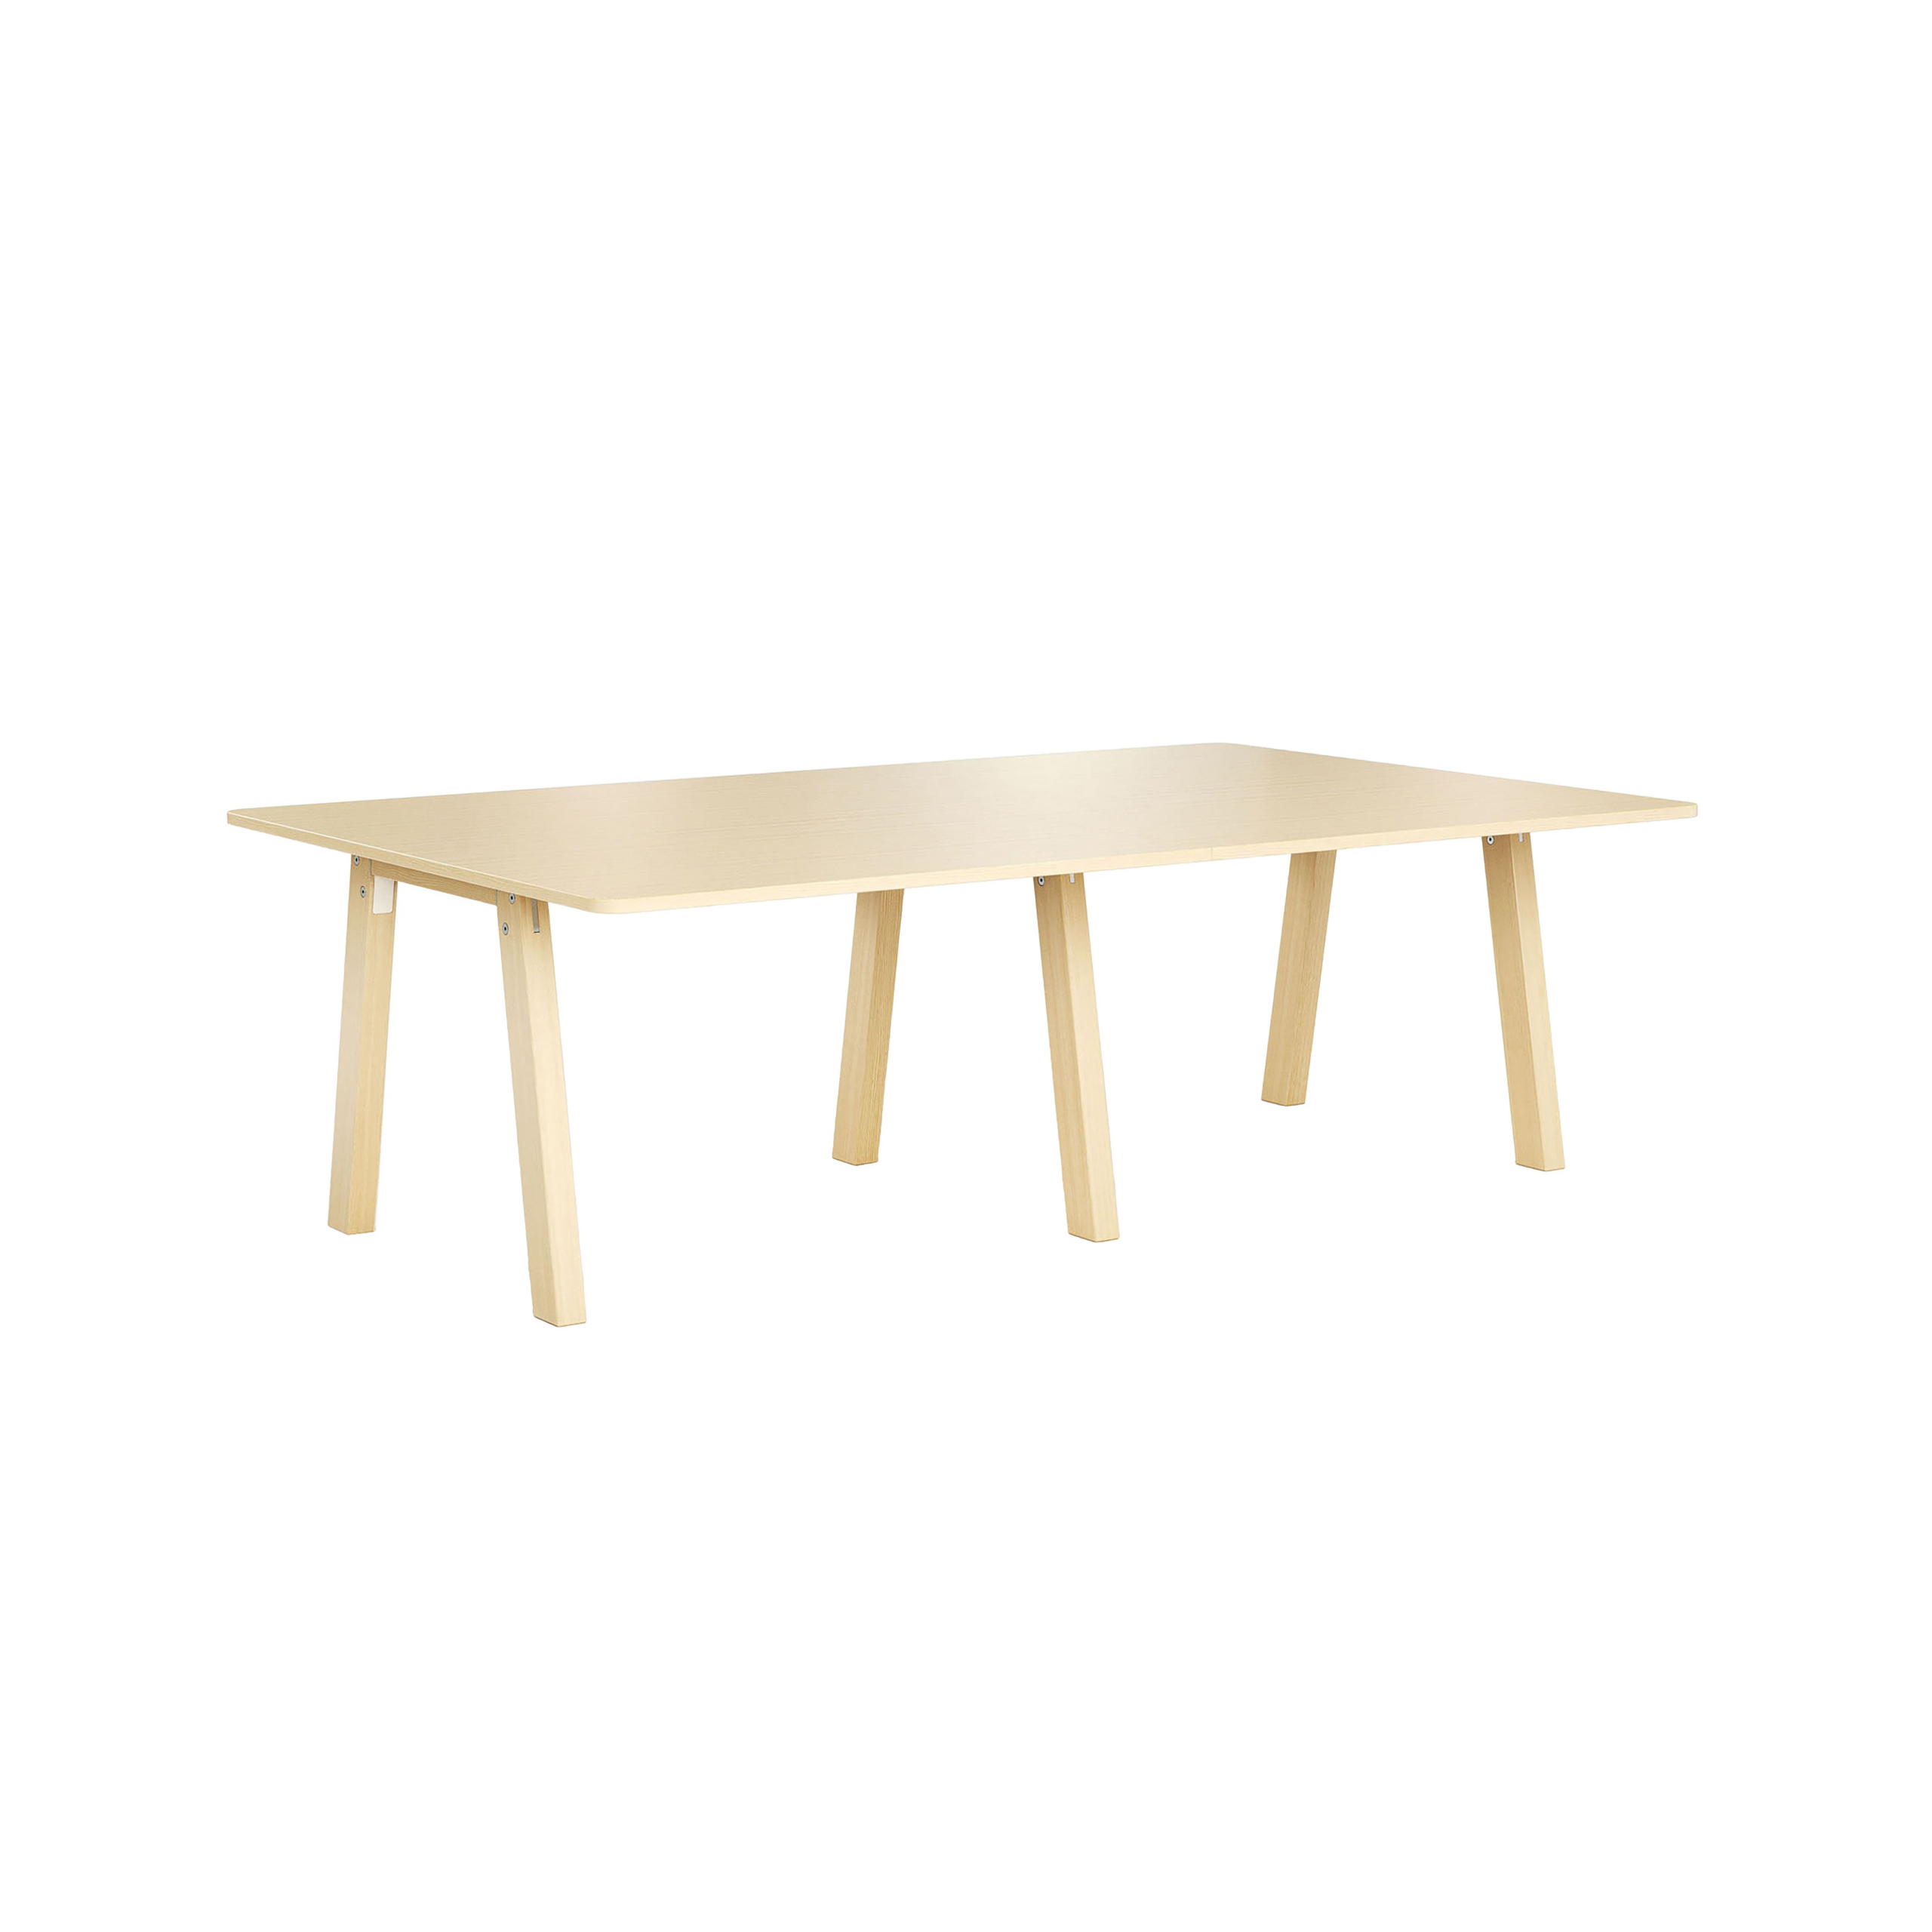 Collaborate Meeting table with wooden legs product image 1